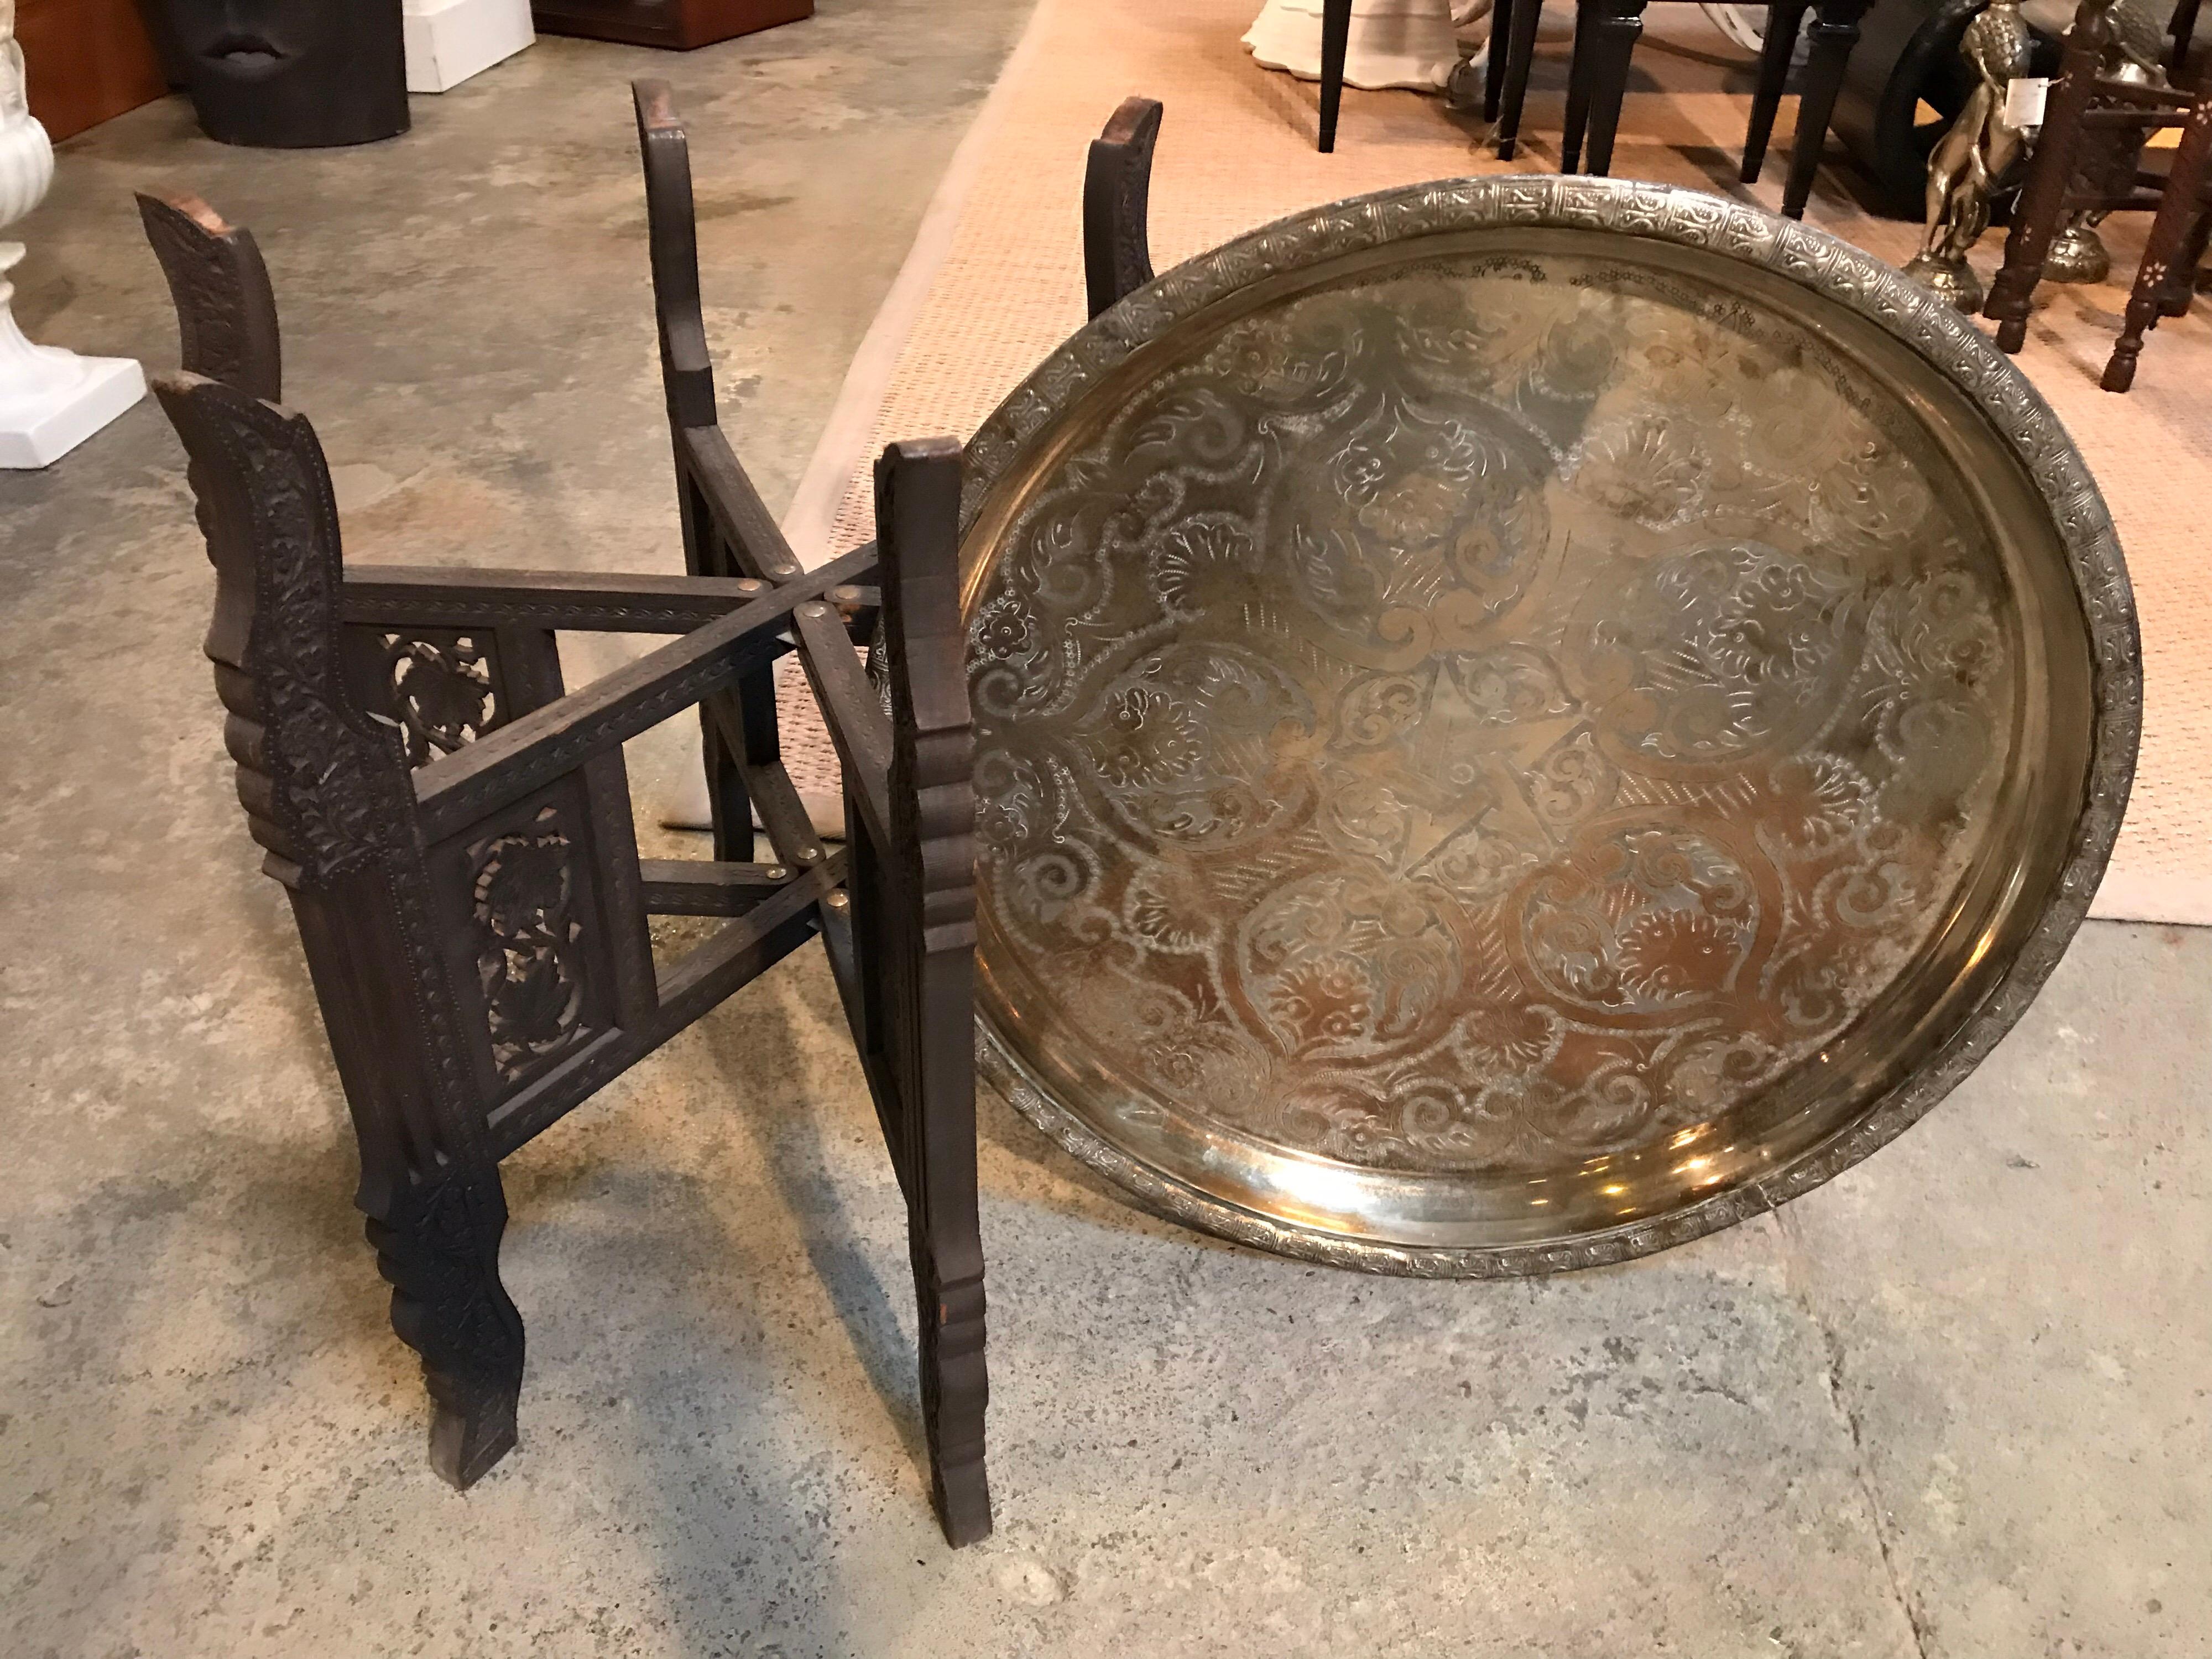 This Moroccan table has both Indian and Egyptian stylings. It is a six legged table that can fold flat into 2 legs. Exotic carvings and patterns are on display throughout.